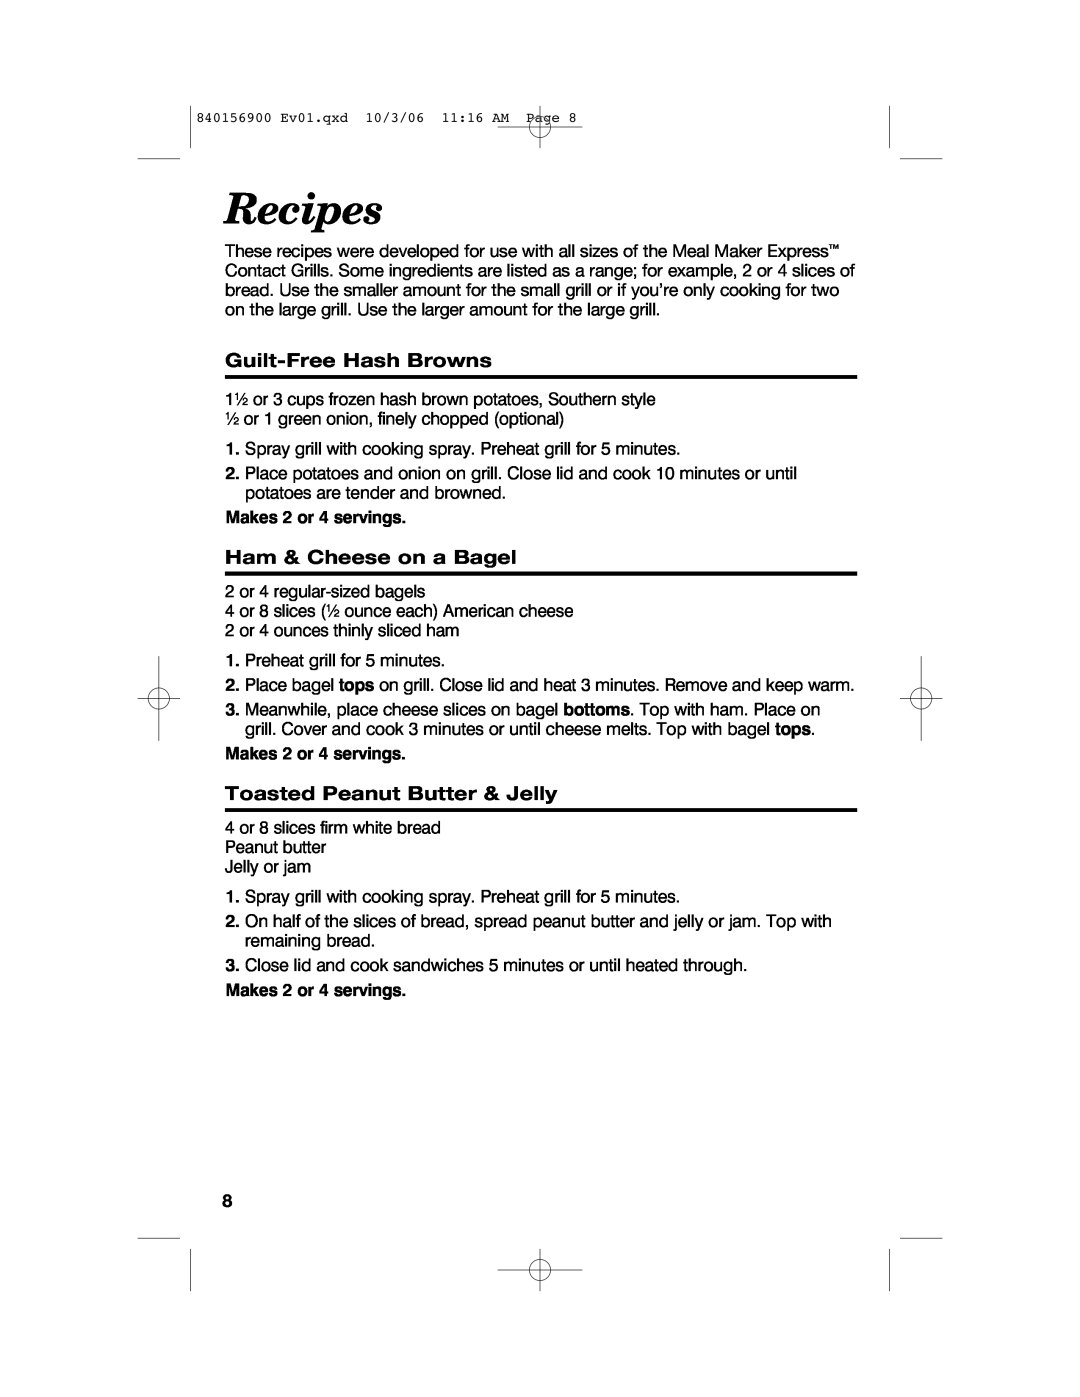 Hamilton Beach 25285 manual Recipes, Guilt-Free Hash Browns, Ham & Cheese on a Bagel, Toasted Peanut Butter & Jelly 